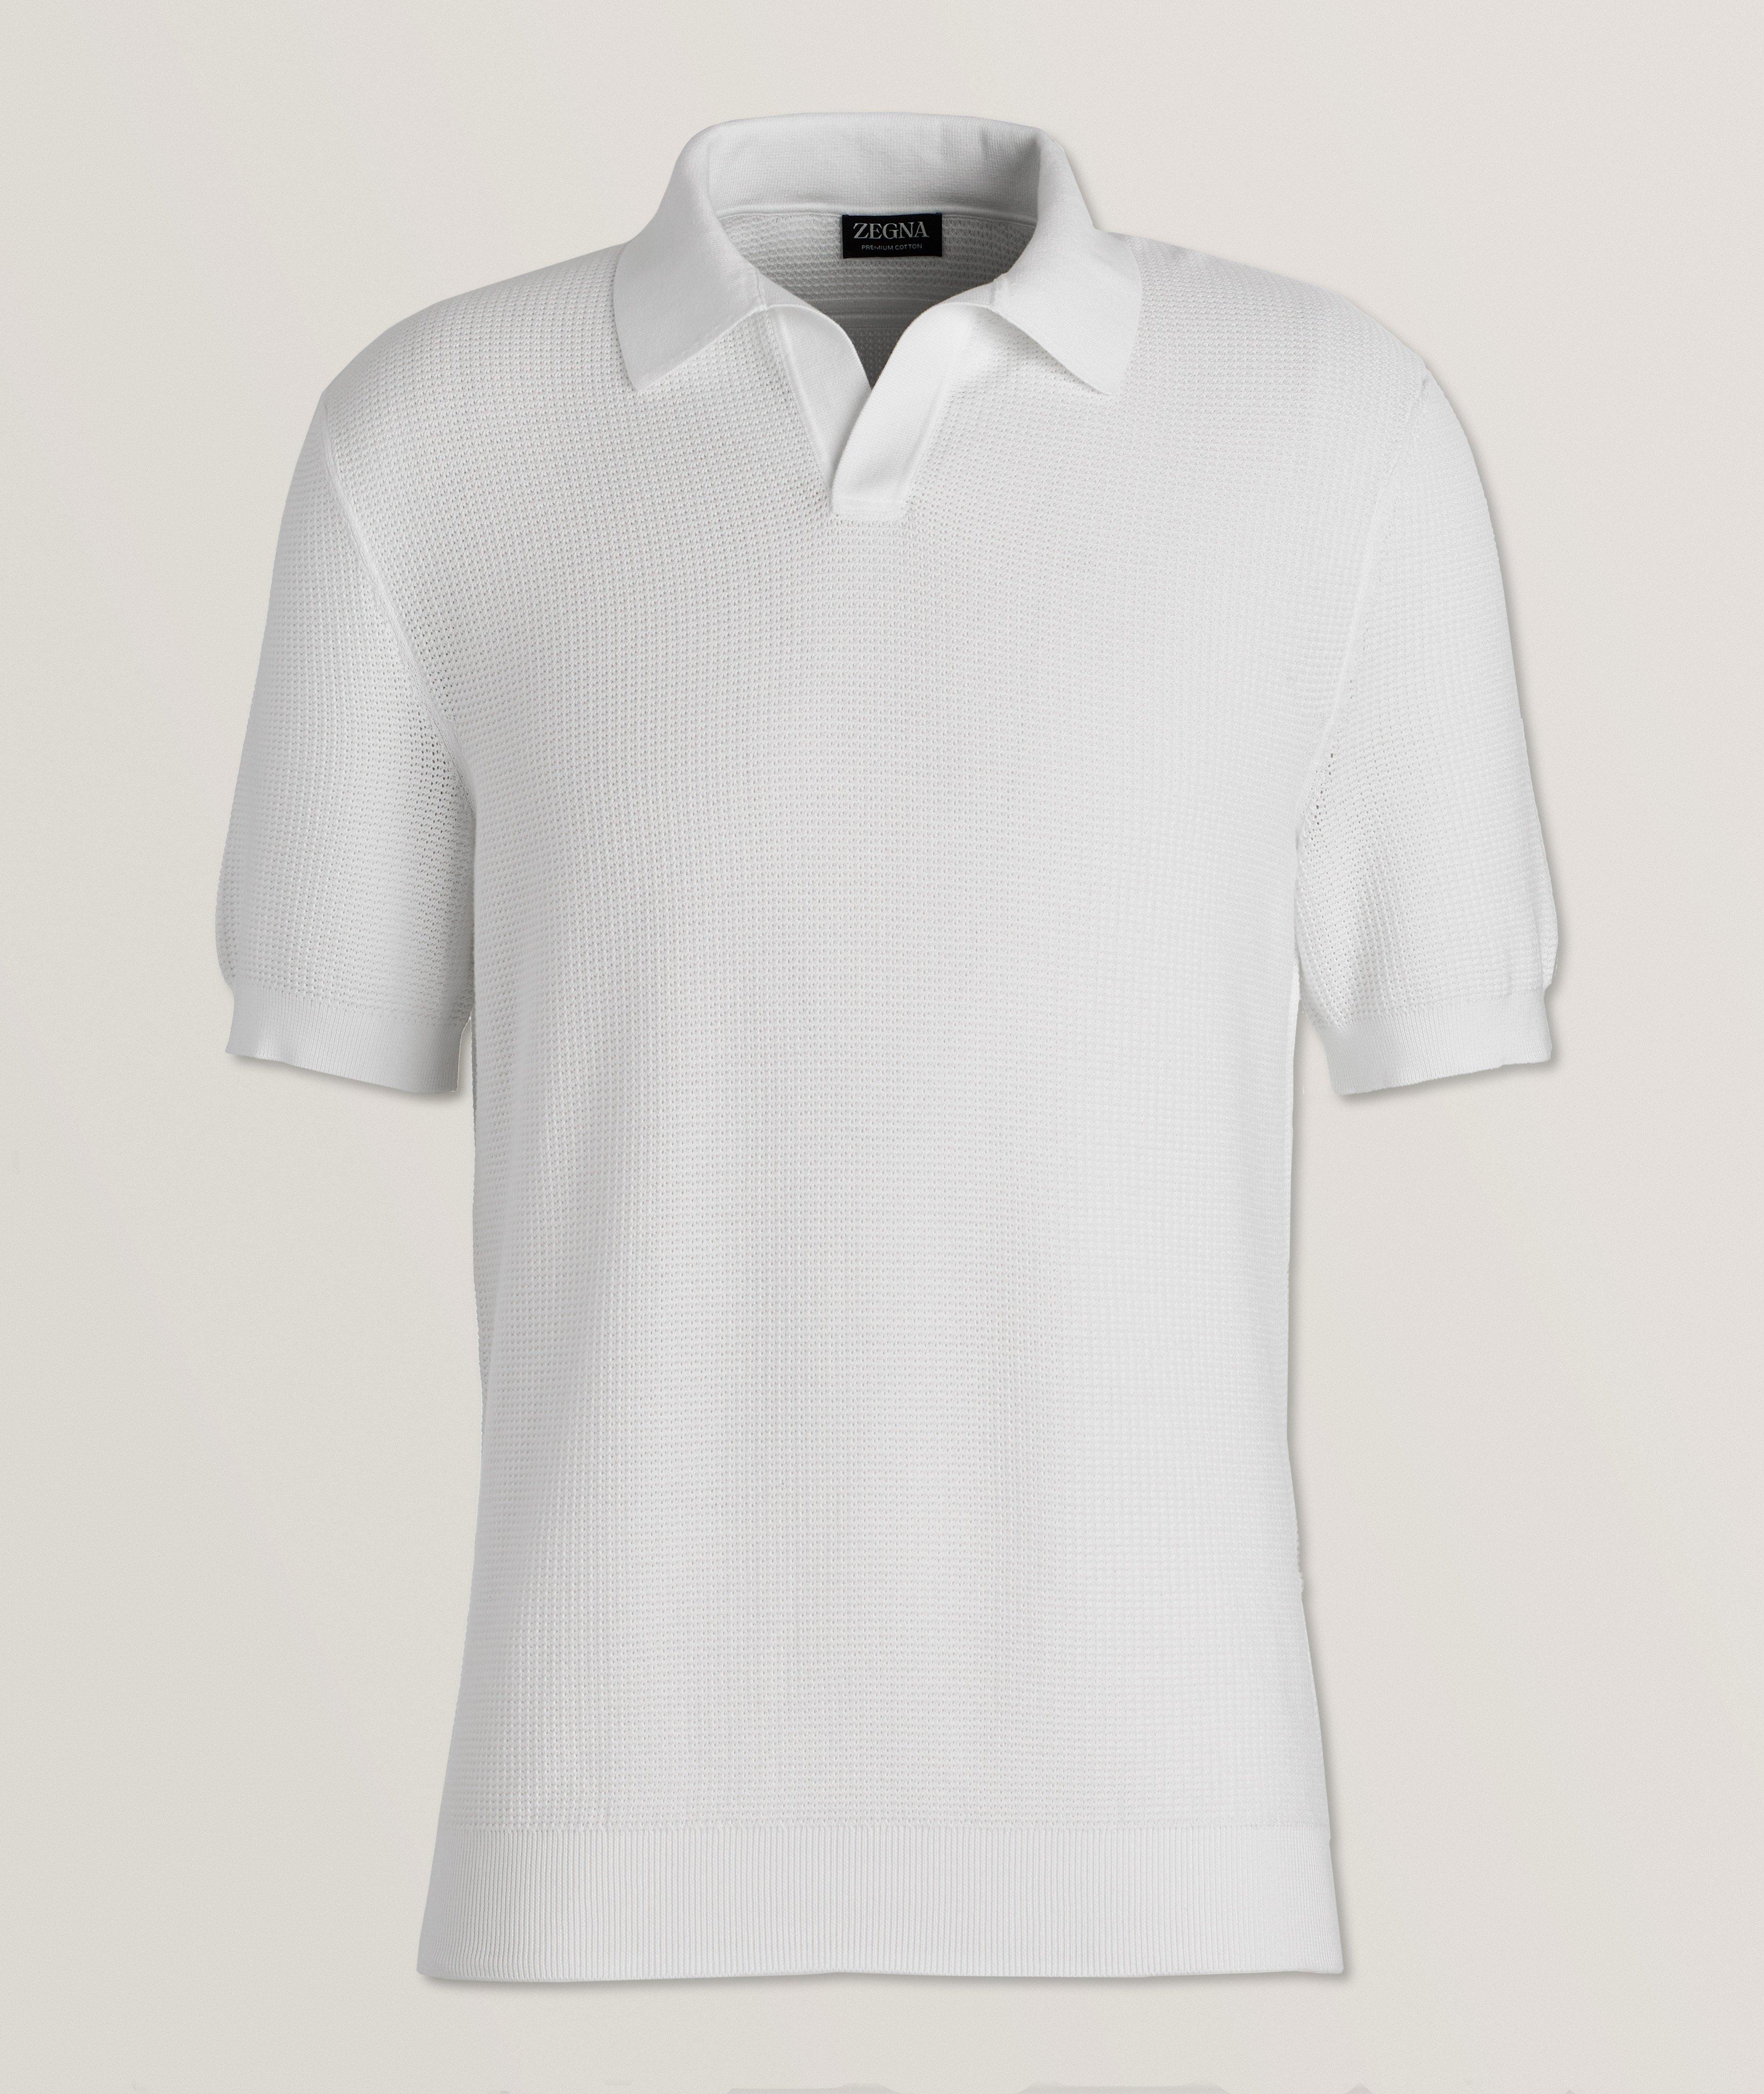 Premium Cotton Knitted Polo